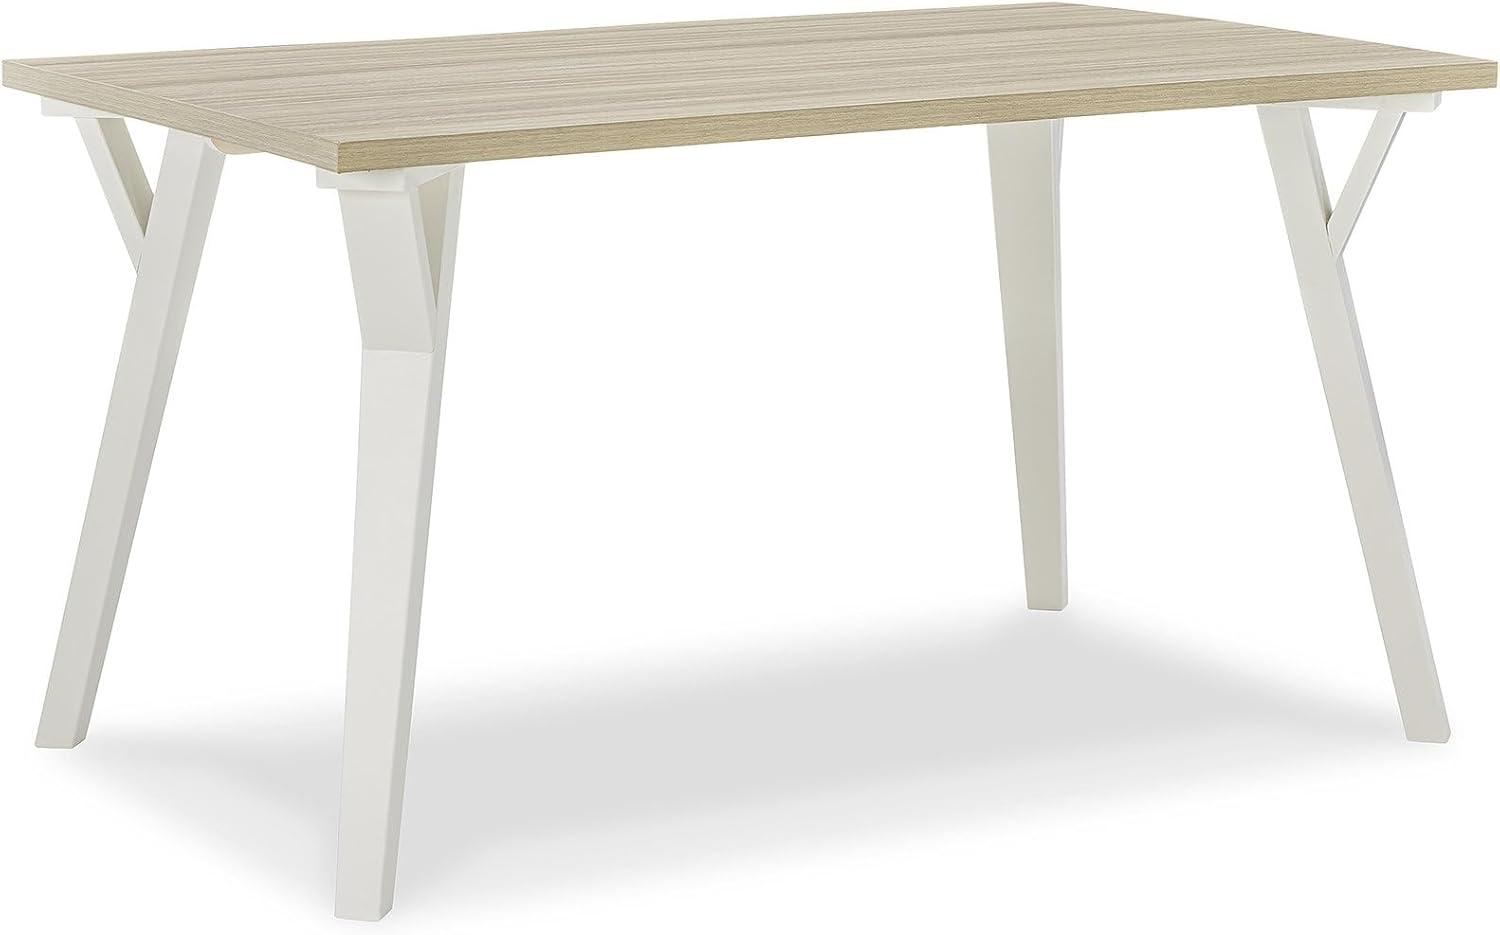 Beige and White Rectangular Wood Dining Table, 55"